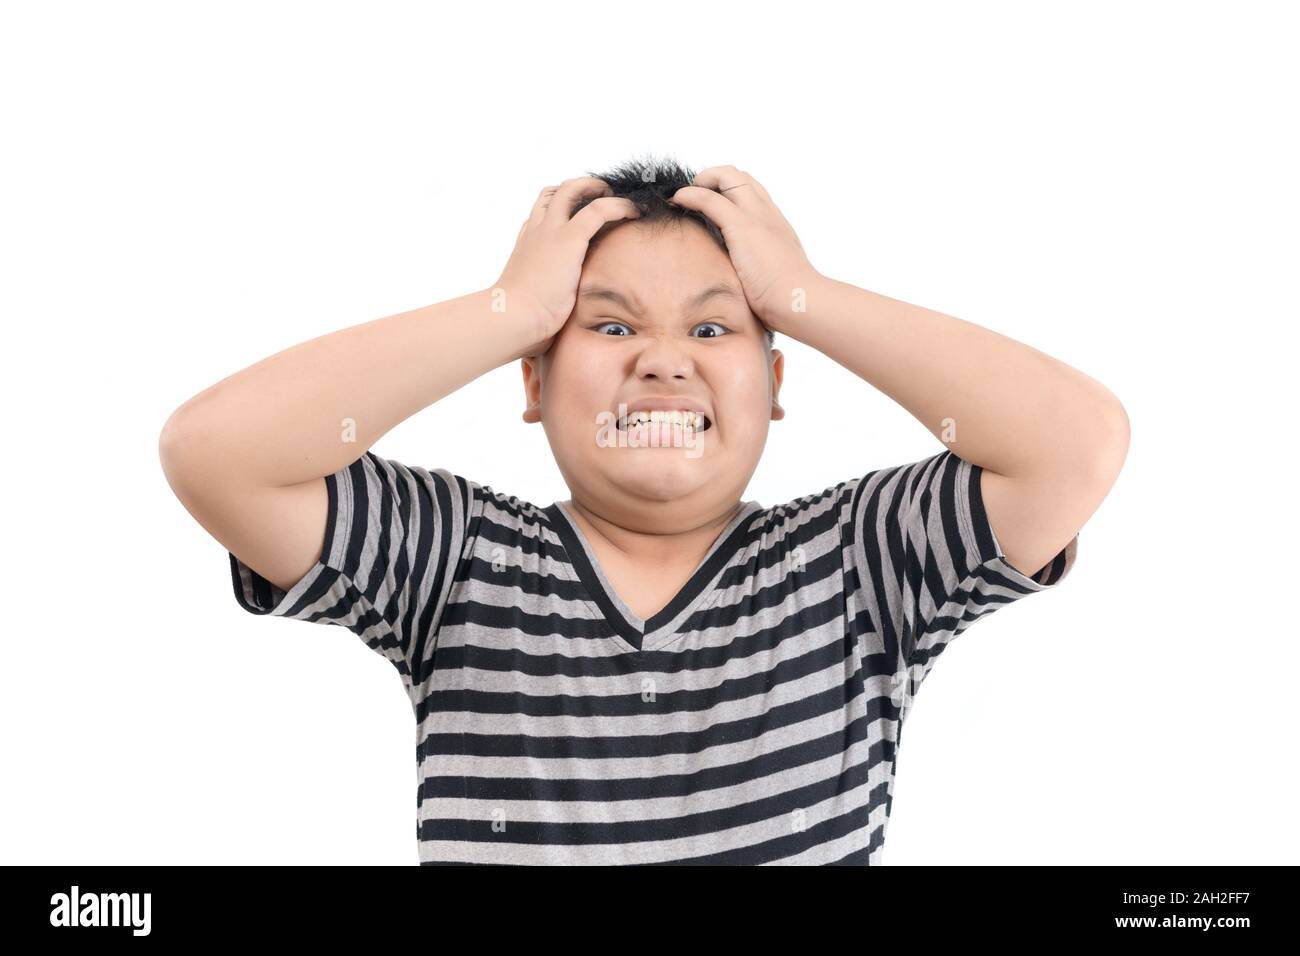 angry screaming obese fat boy in black and white shirt mad raising fist frustrated and furious. isolated on white background. Human emotions and facia Stock Photo